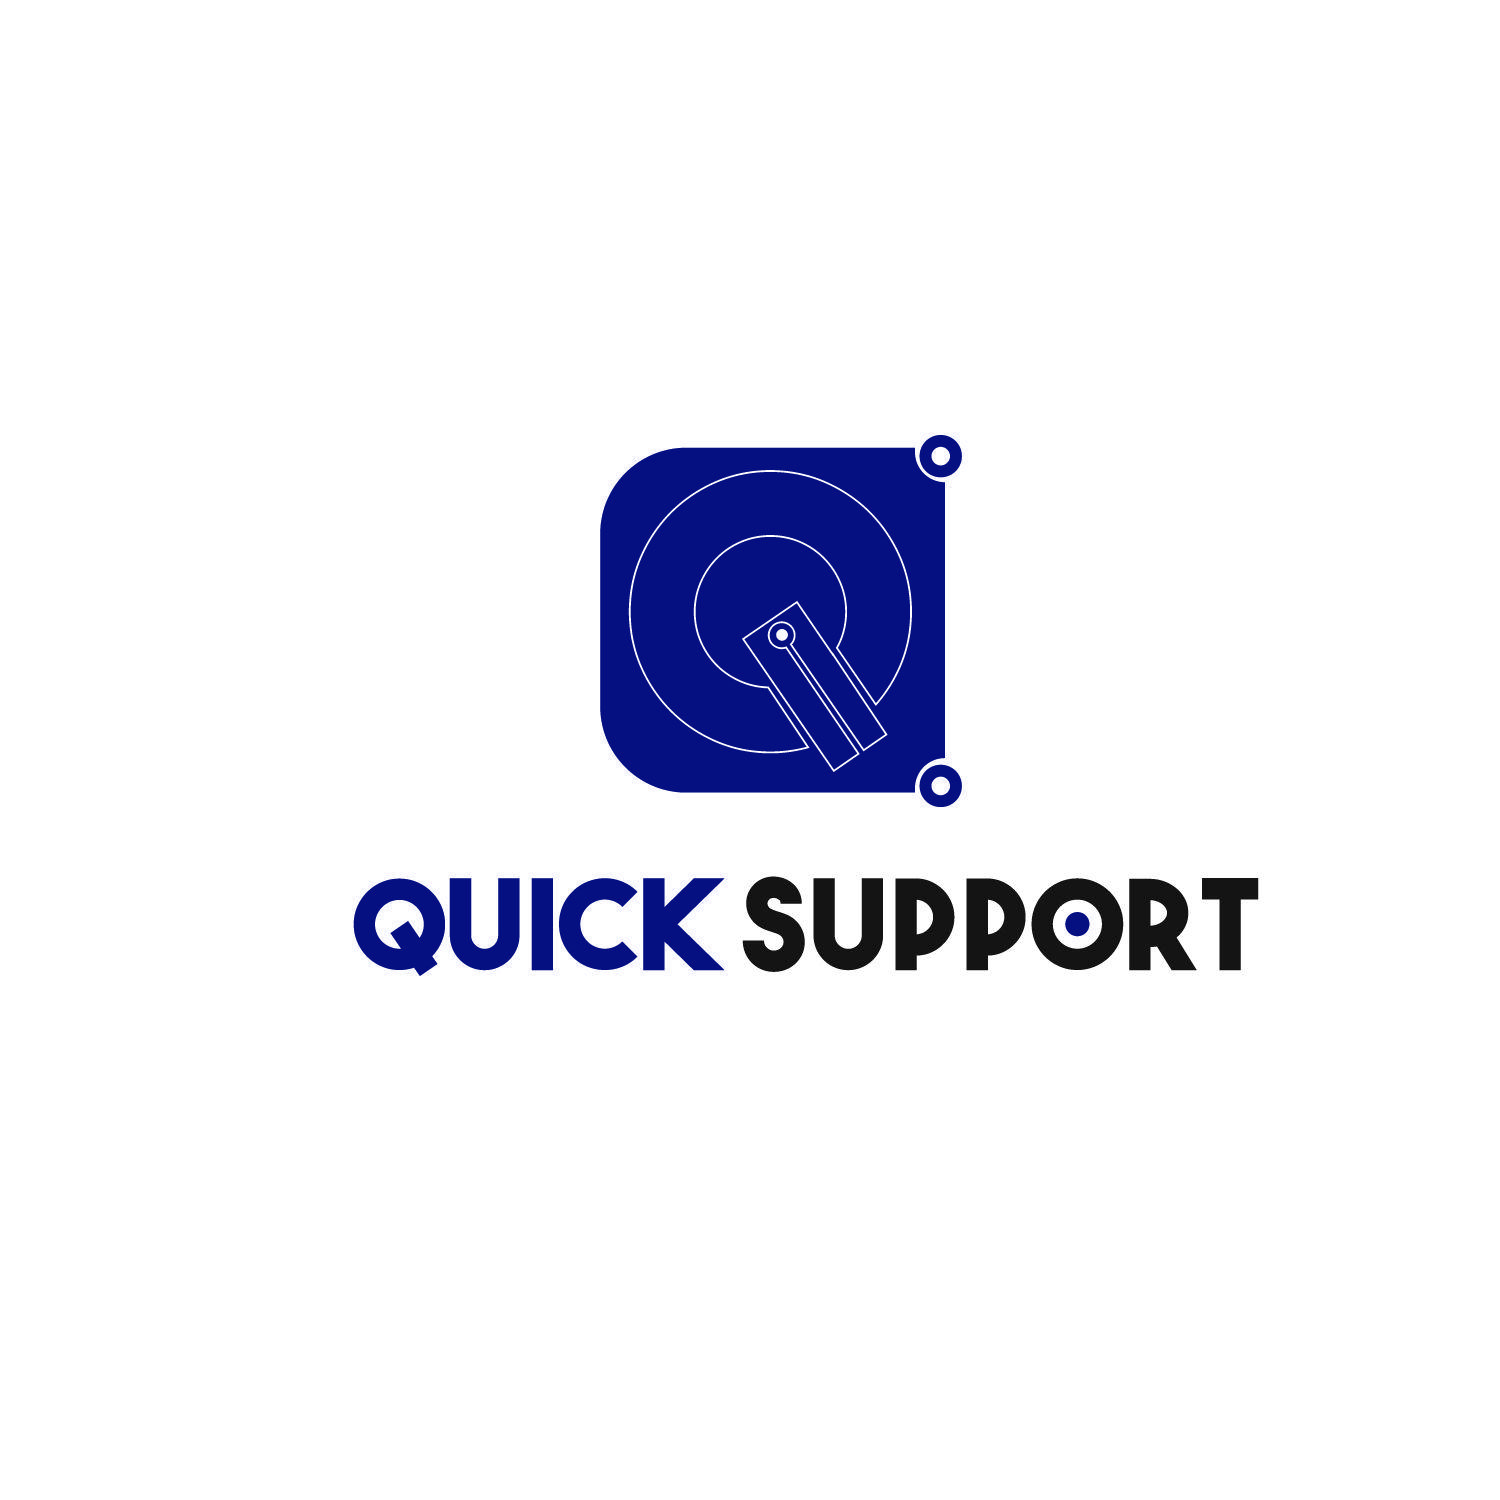 Colorful Computer Logo - Modern, Colorful, Computer Logo Design for Quick Support